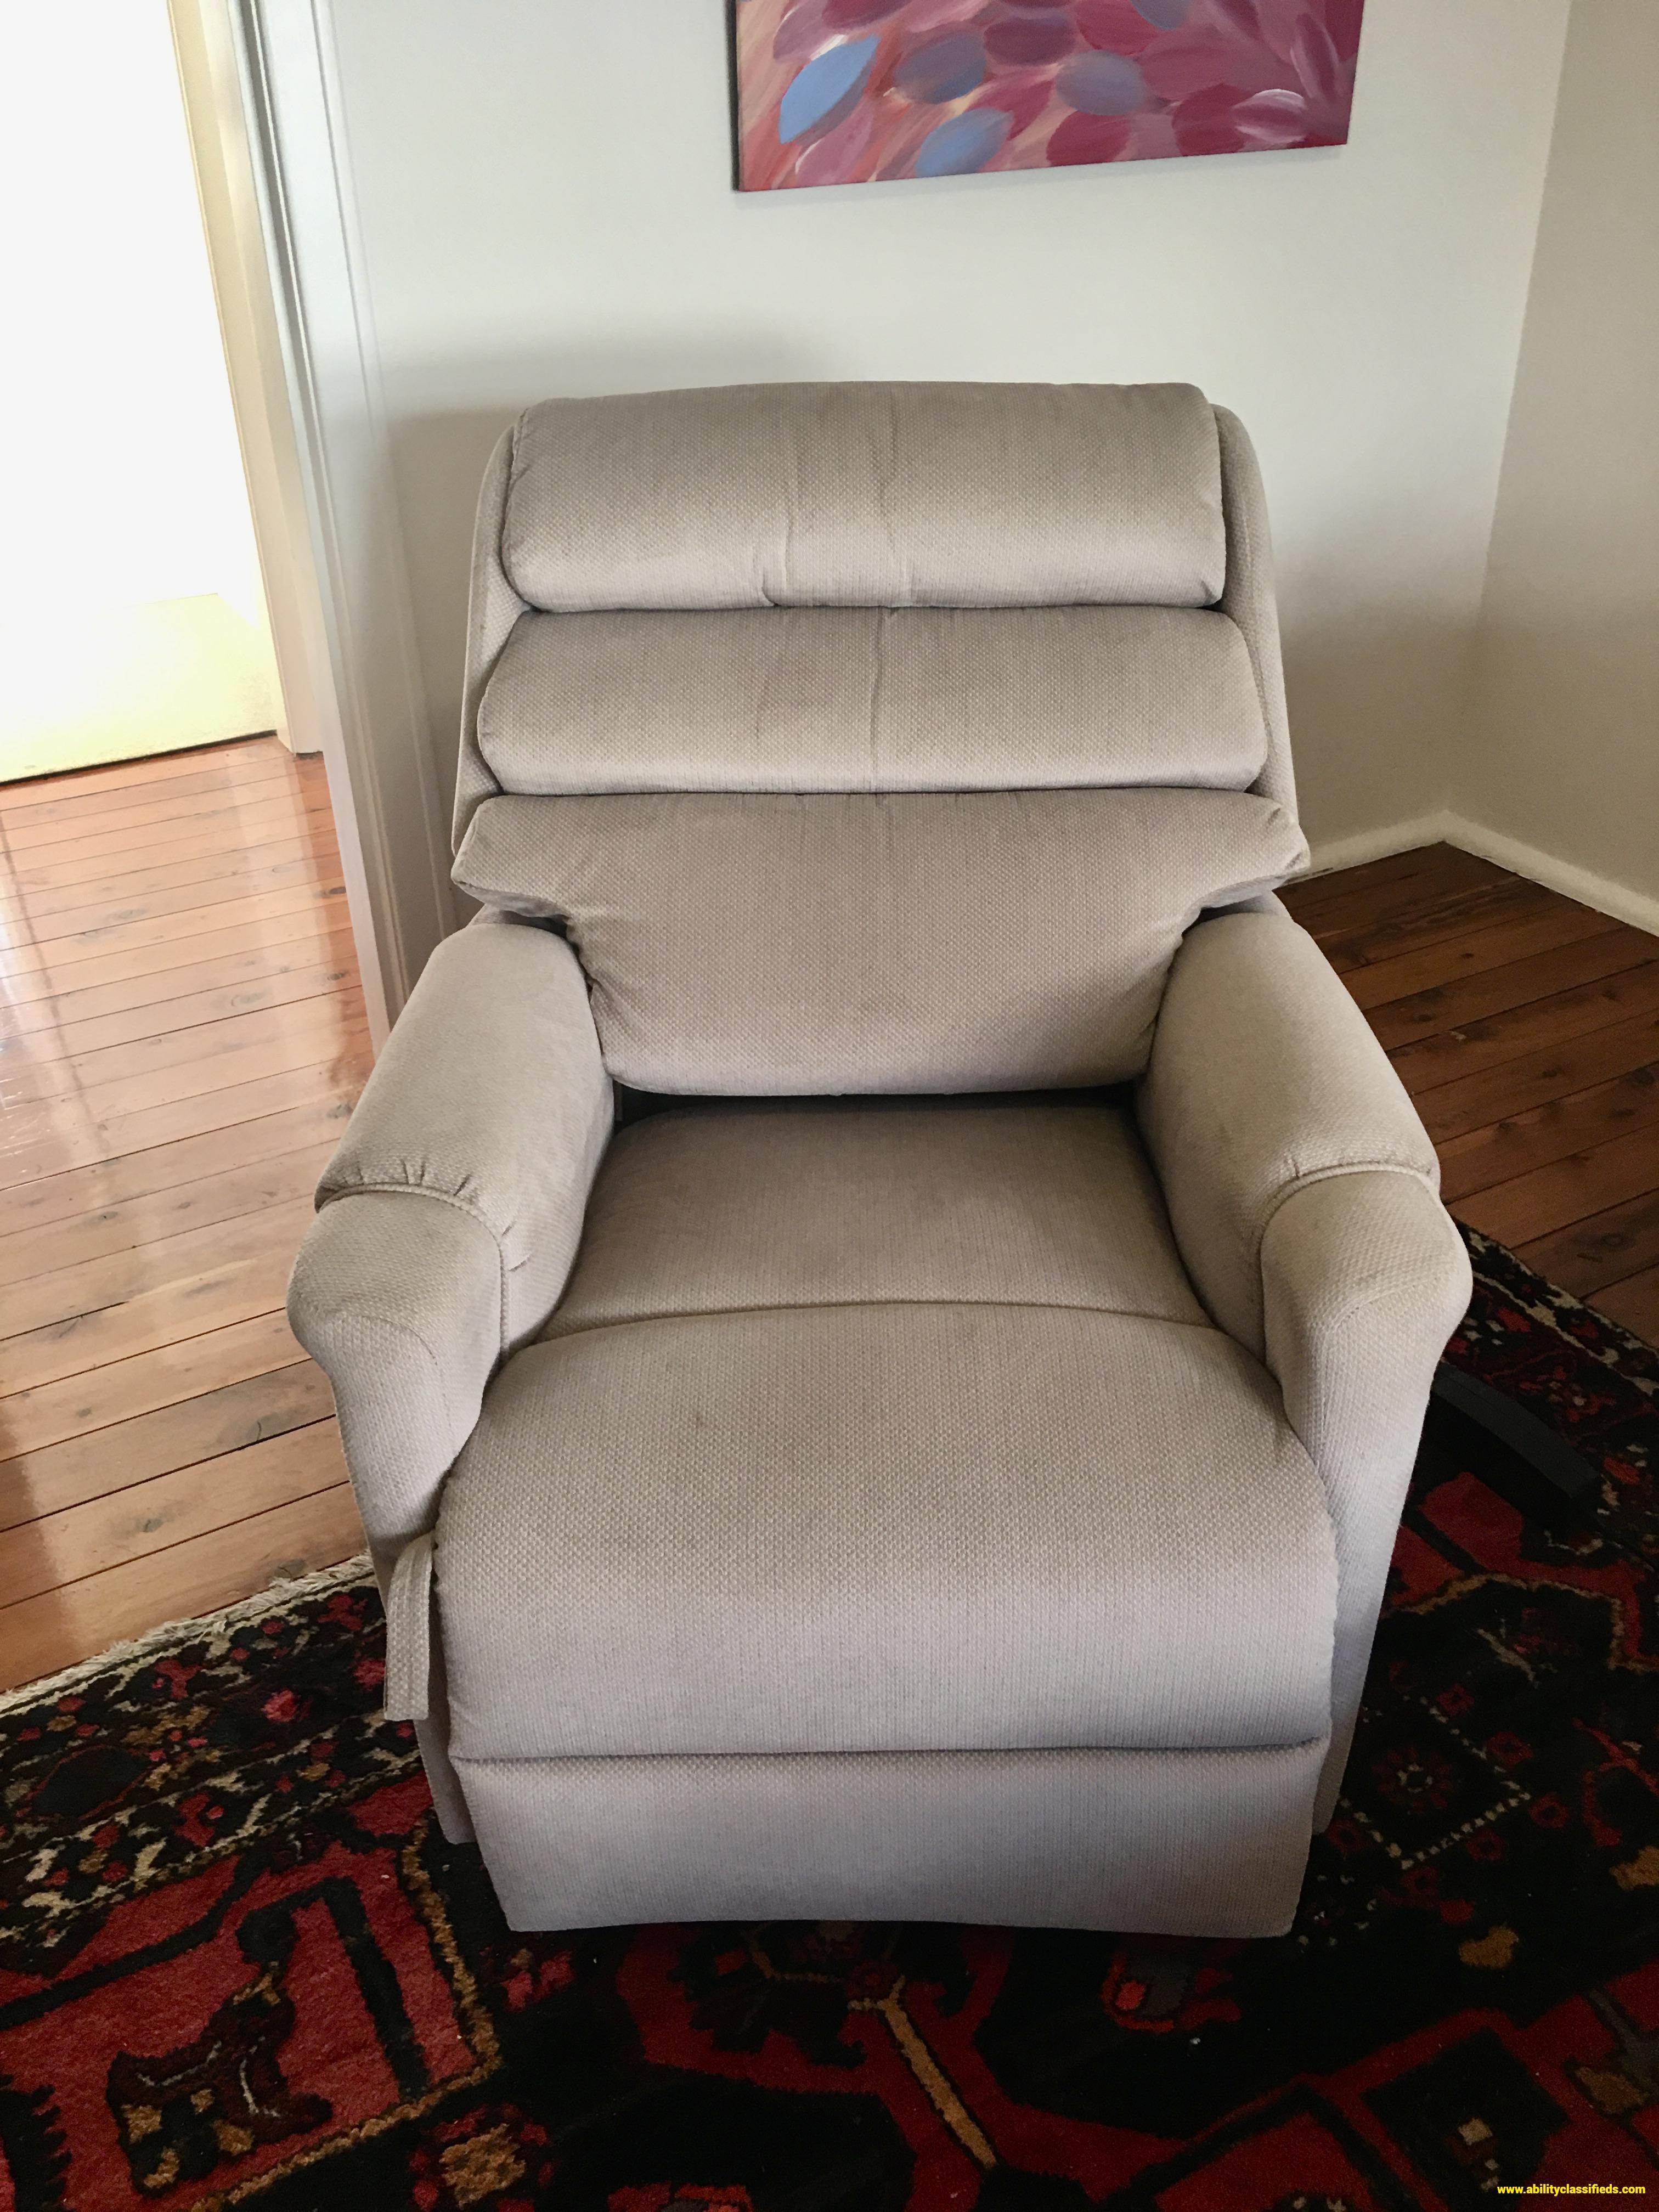 LIFT AND RECLINE CHAIR - PETITE